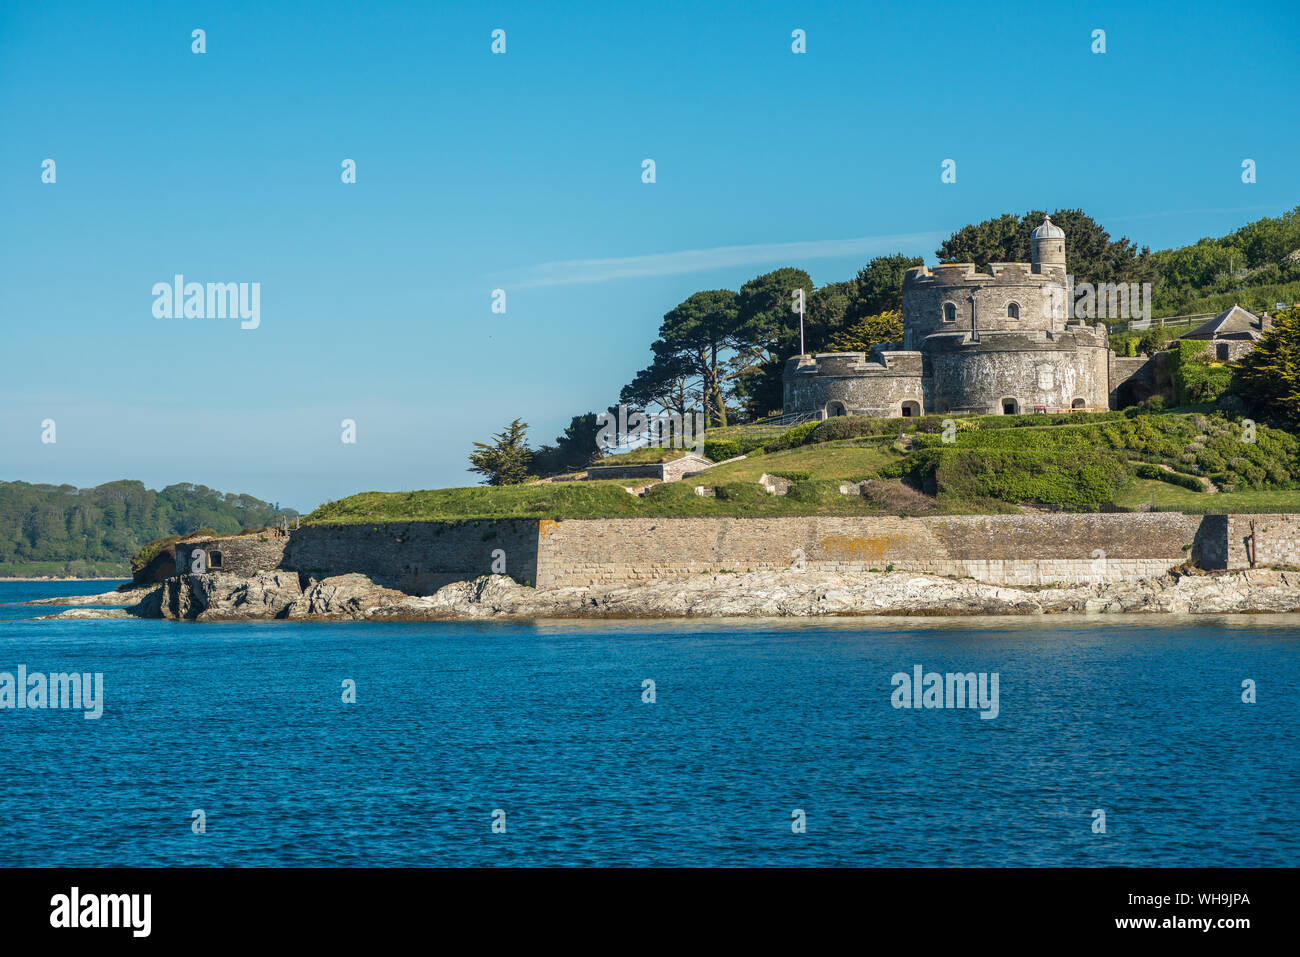 St. Mawes Castle, an artillery fort constructed by King Henry VIII near Falmouth, Cornwall, England, United Kingdom, Europe Stock Photo